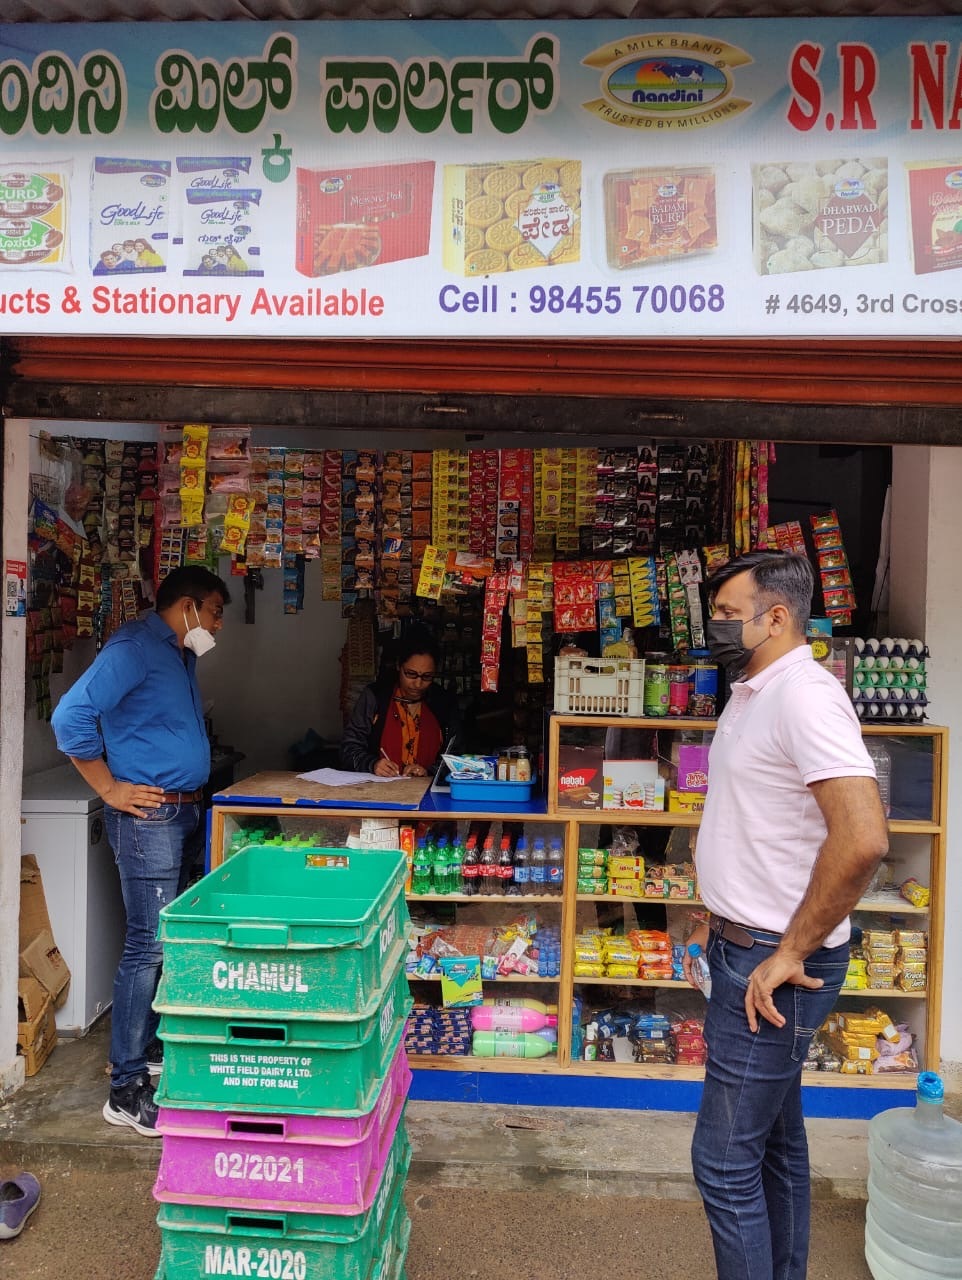 (L) Milan Partani, Business Head of Meesho SuperStore and (R) Dipak Nachani from Meesho's Business Finance team, talking to a retailer during a field visit in Mysore. Both men are brown, south-asian wearing shirts and jeans standing outside a small grocery shop selling every day groceries including dry groceries, biscuits, soaps, eggs, bottled water, etc.